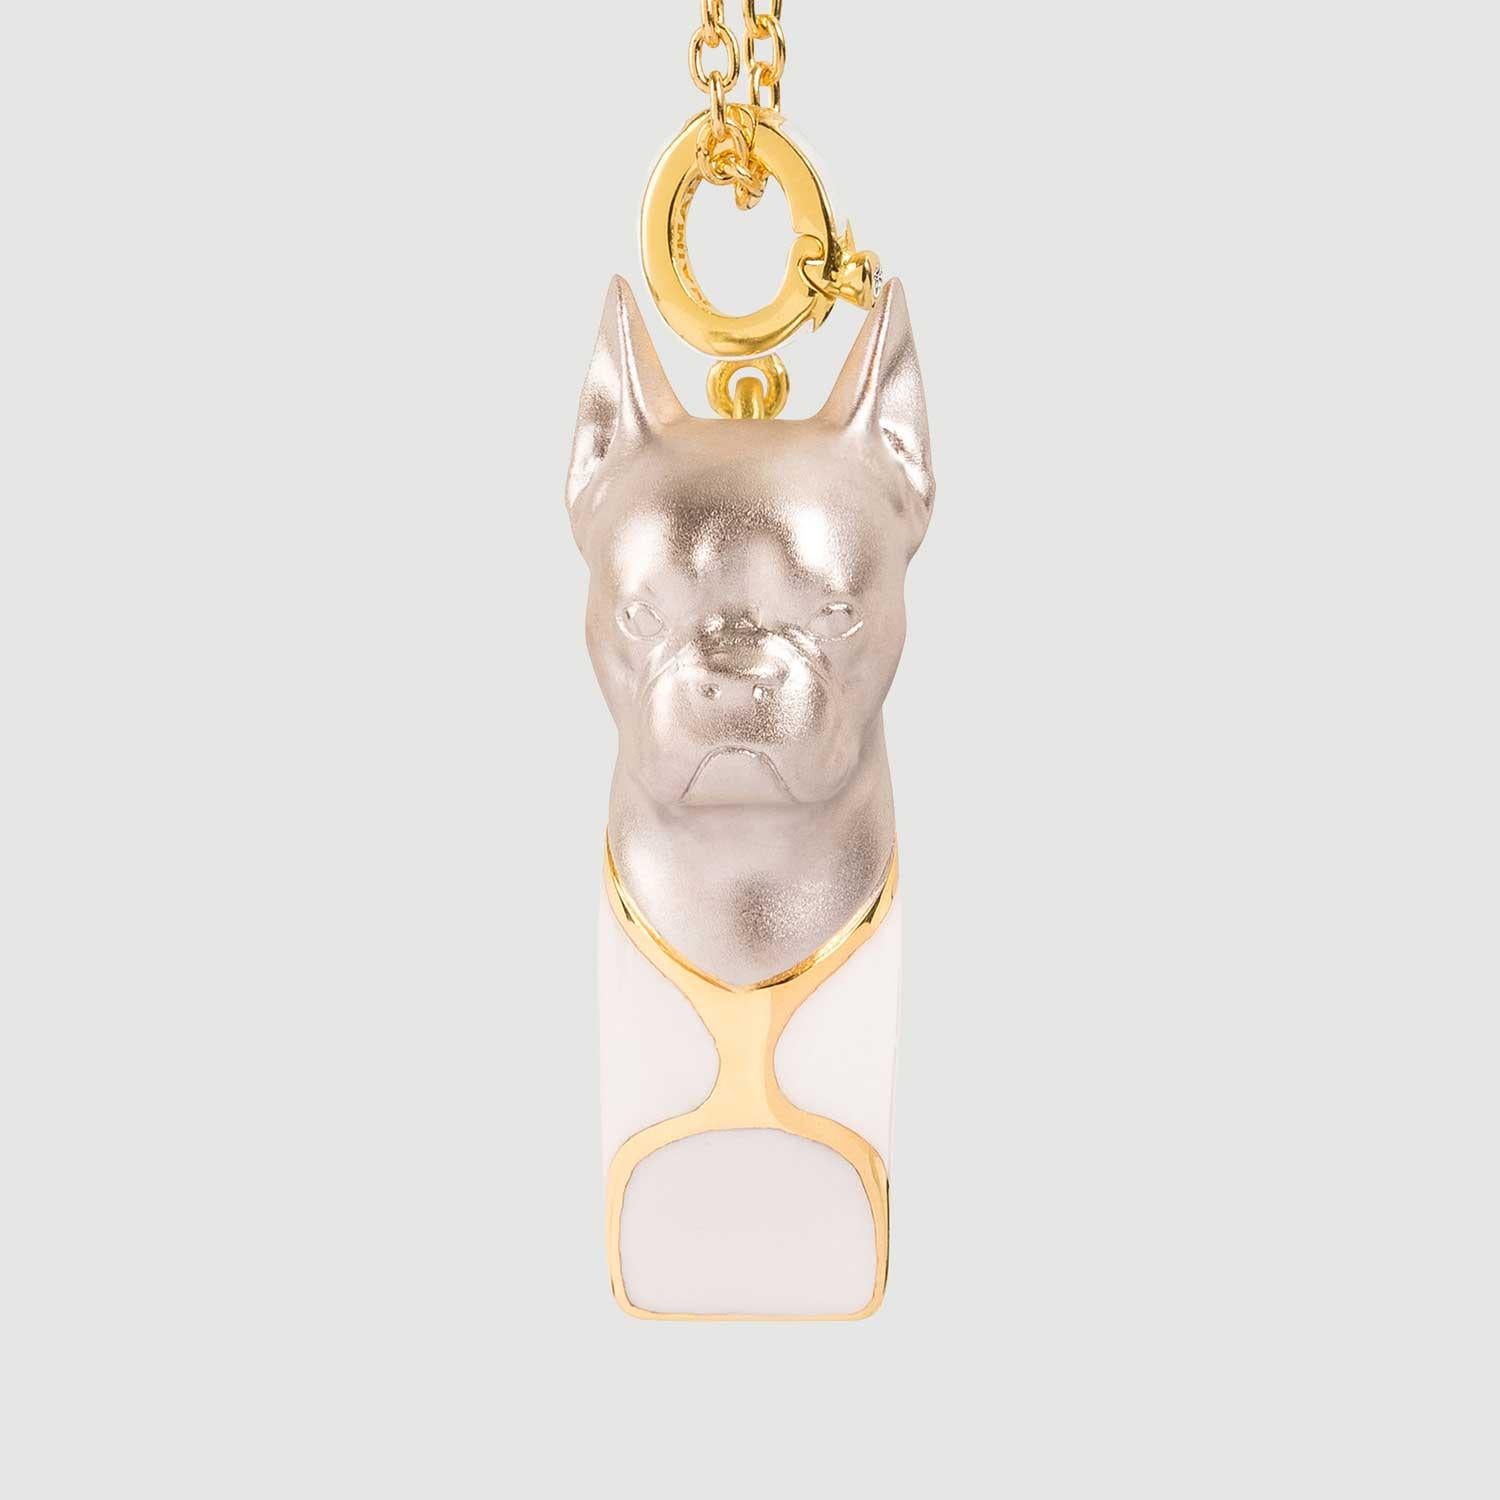 This French Bulldog Necklace features a design inspired by Georges Hilbert's renowned French Bulldog sculpture and boasts an alluring, contemporary tribute to Victorian-era dog whistles, also known as 